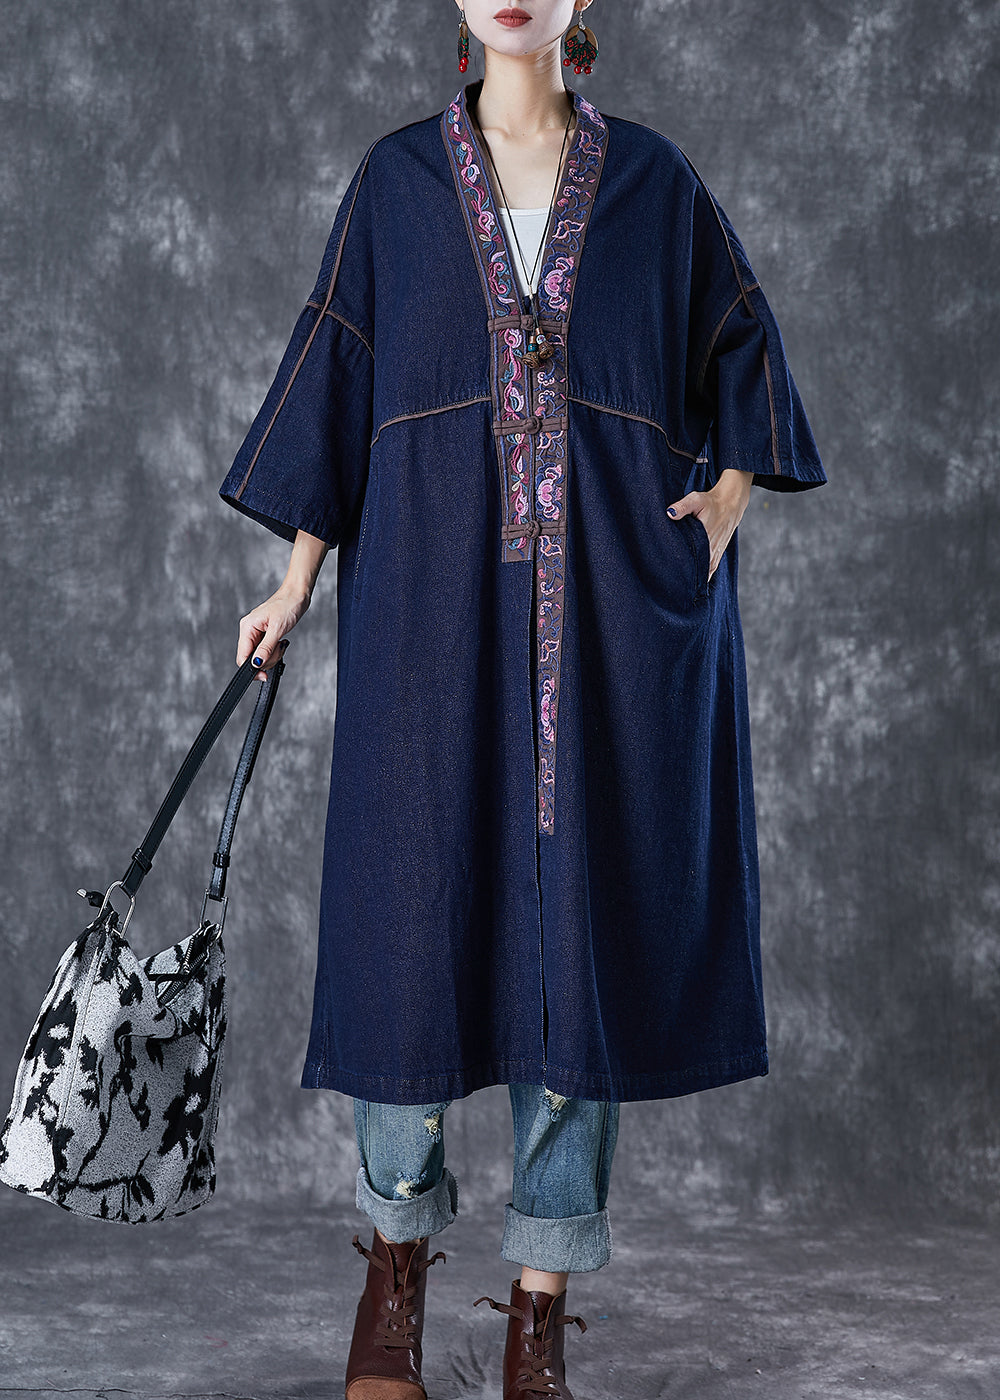 Plus Size Navy Embroideried Chinese Button Denim Trench Fall